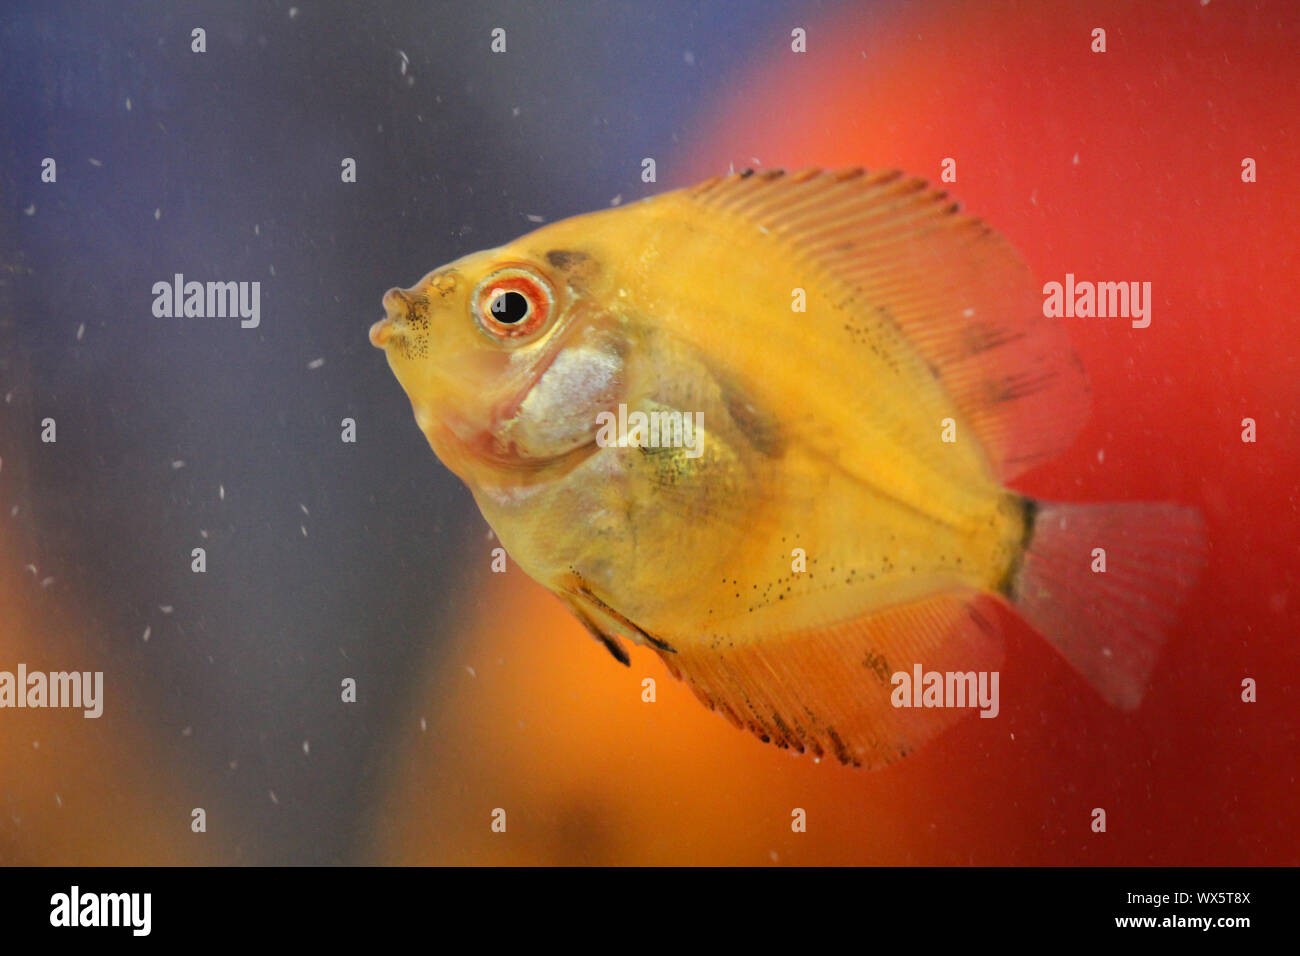 Portrait of a discus fish baby Stock Photo